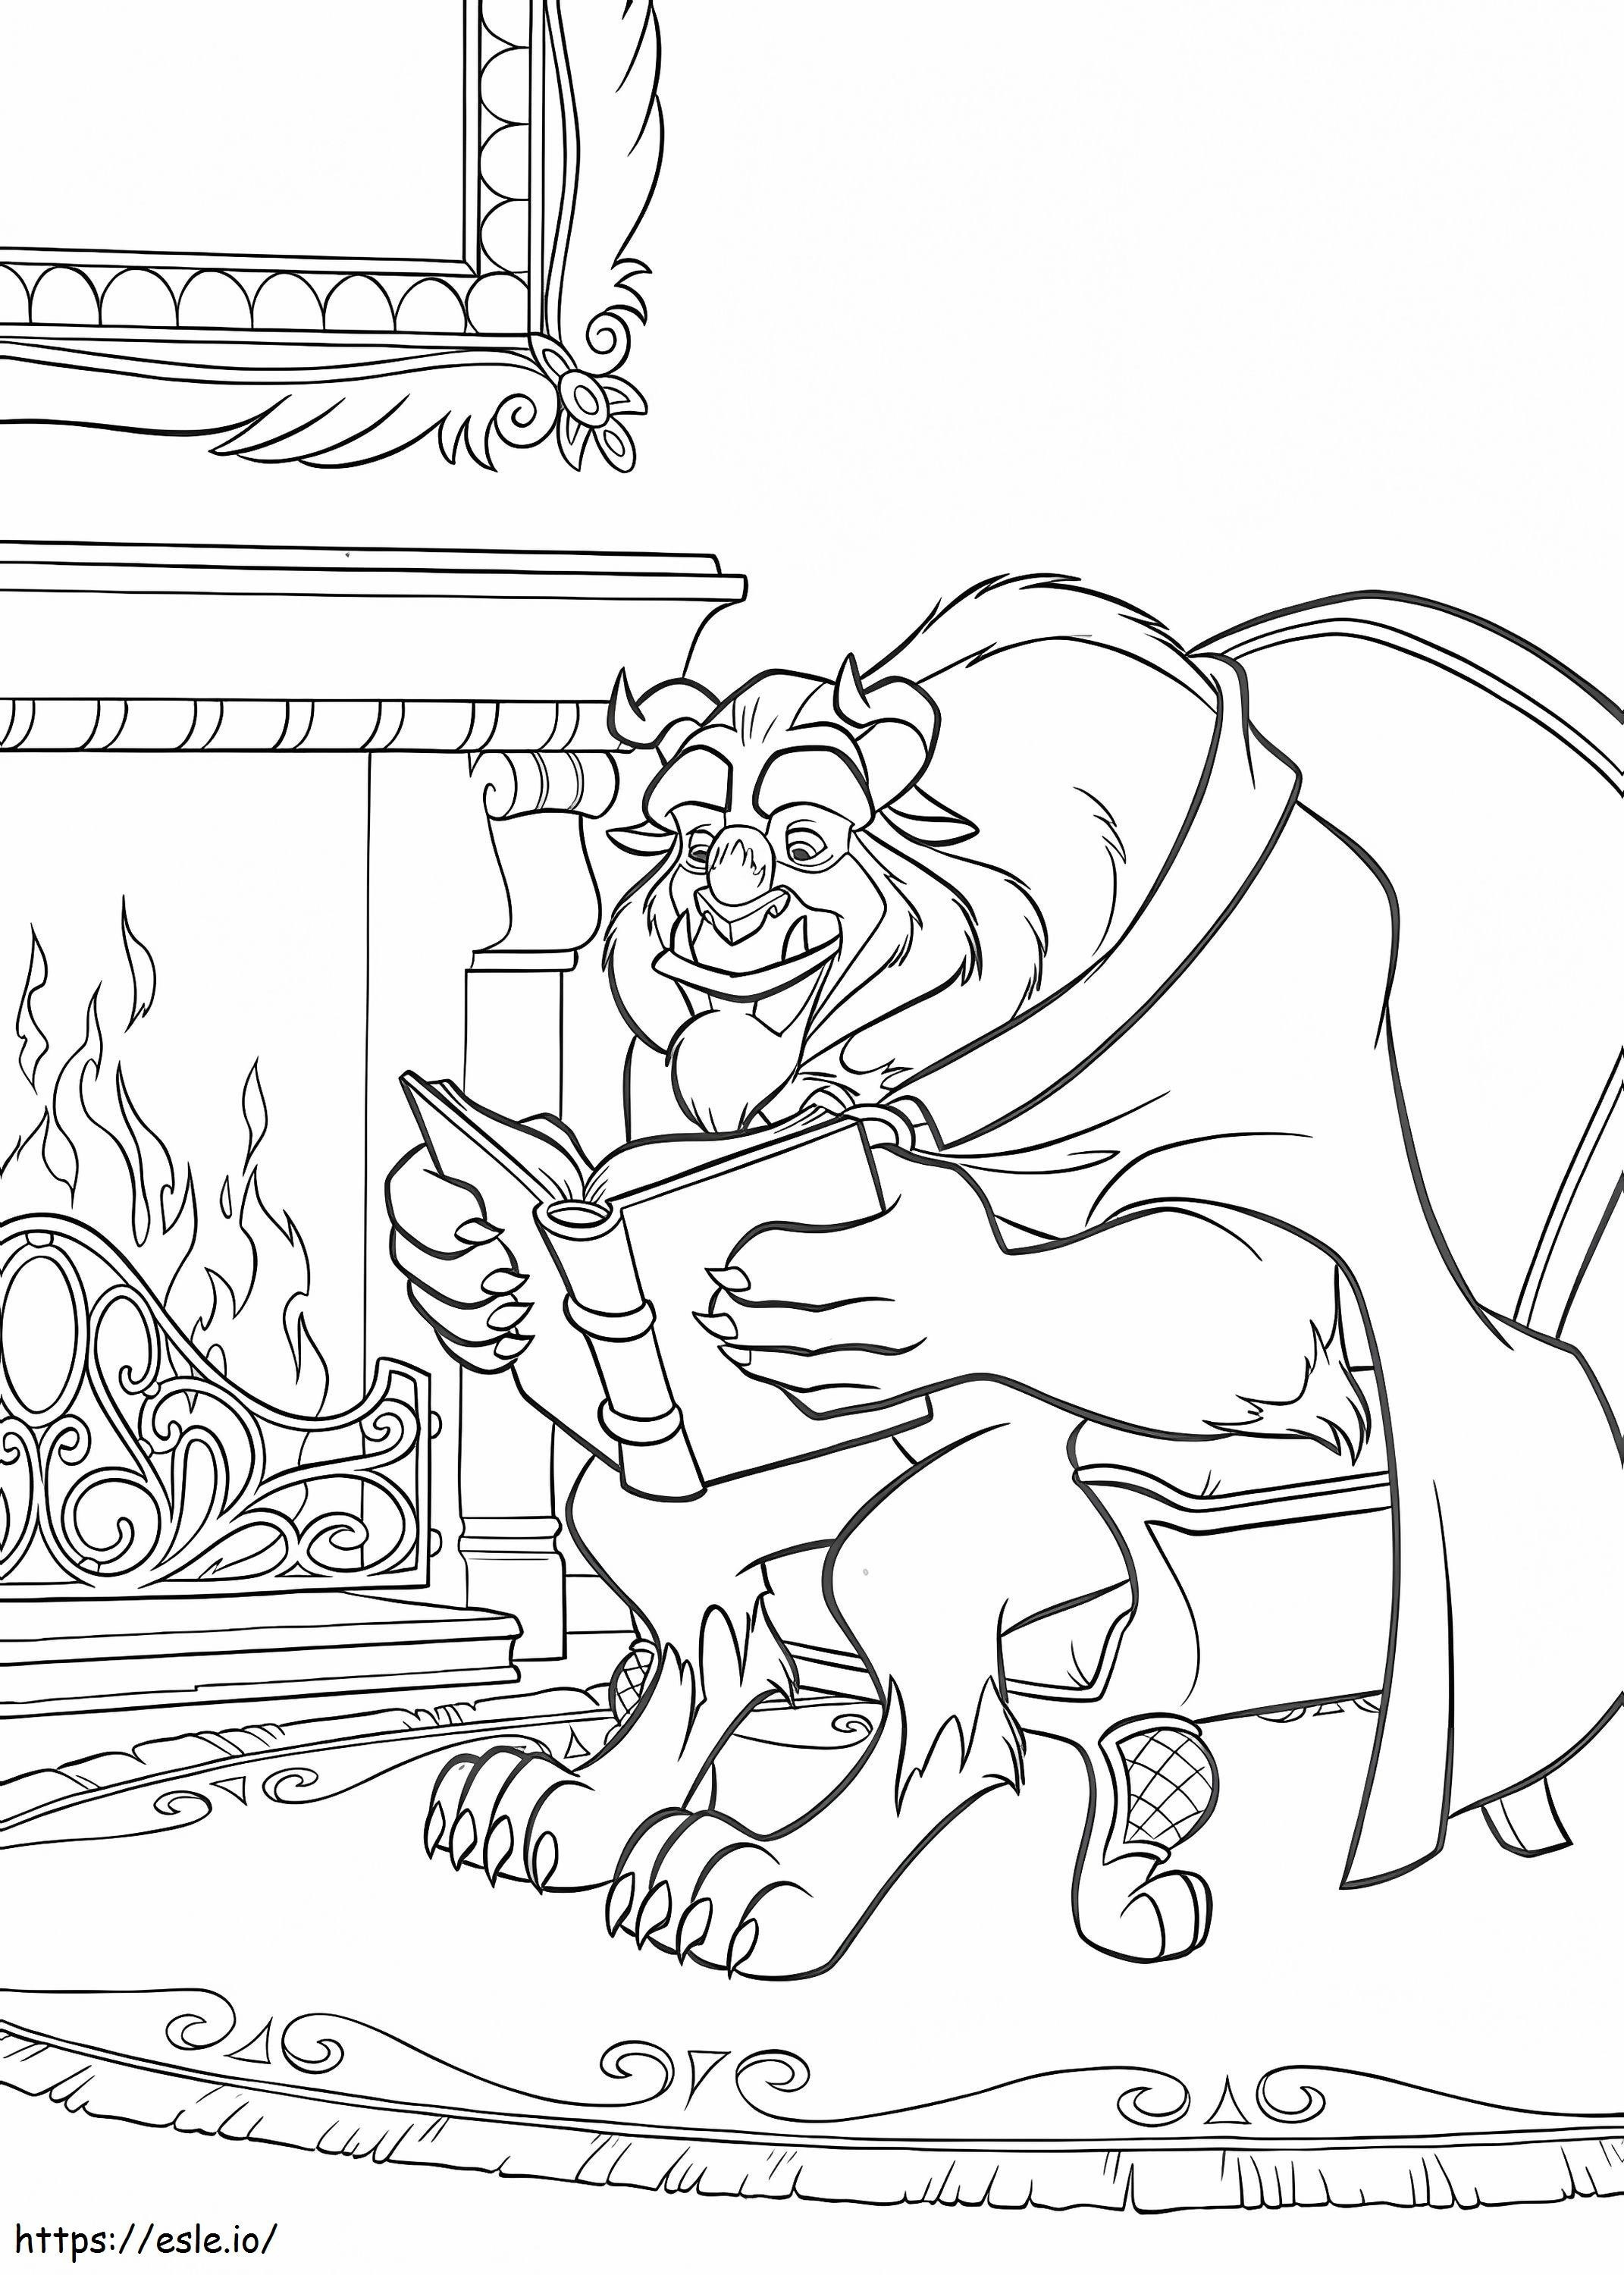 1560584990 Monster Reading A4 coloring page